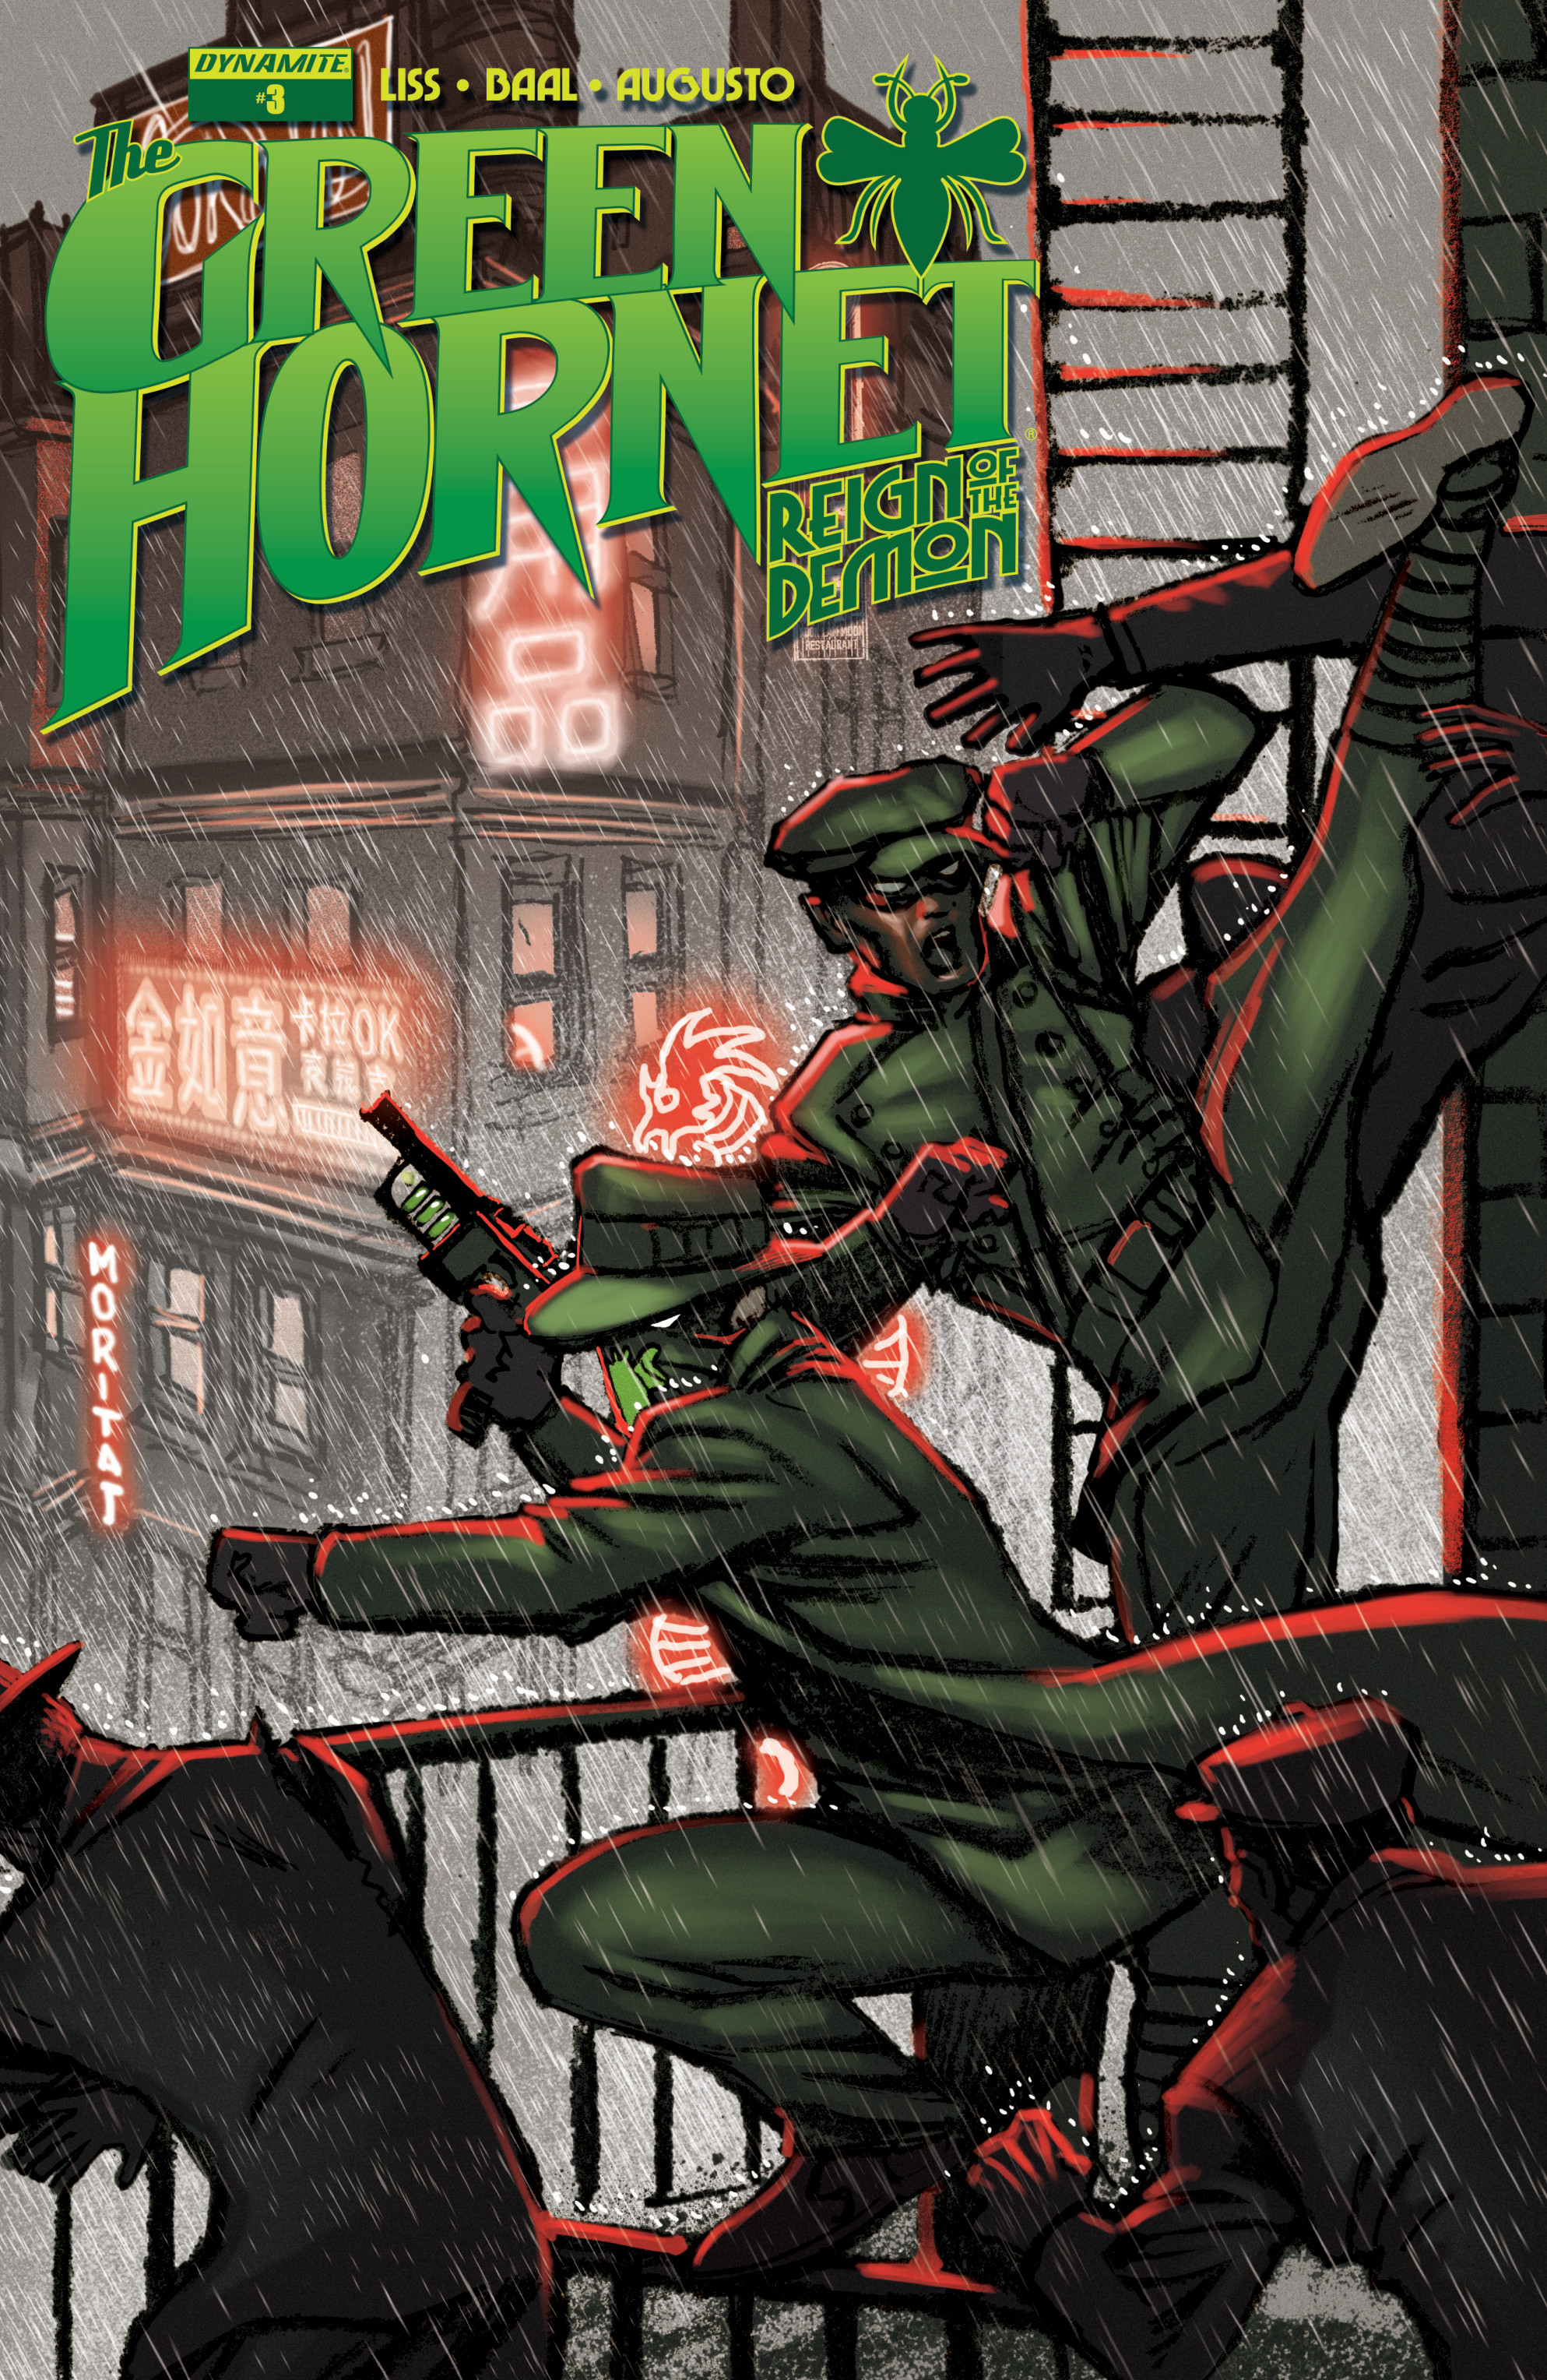 Read online Green Hornet: Reign of The Demon comic -  Issue #3 - 1